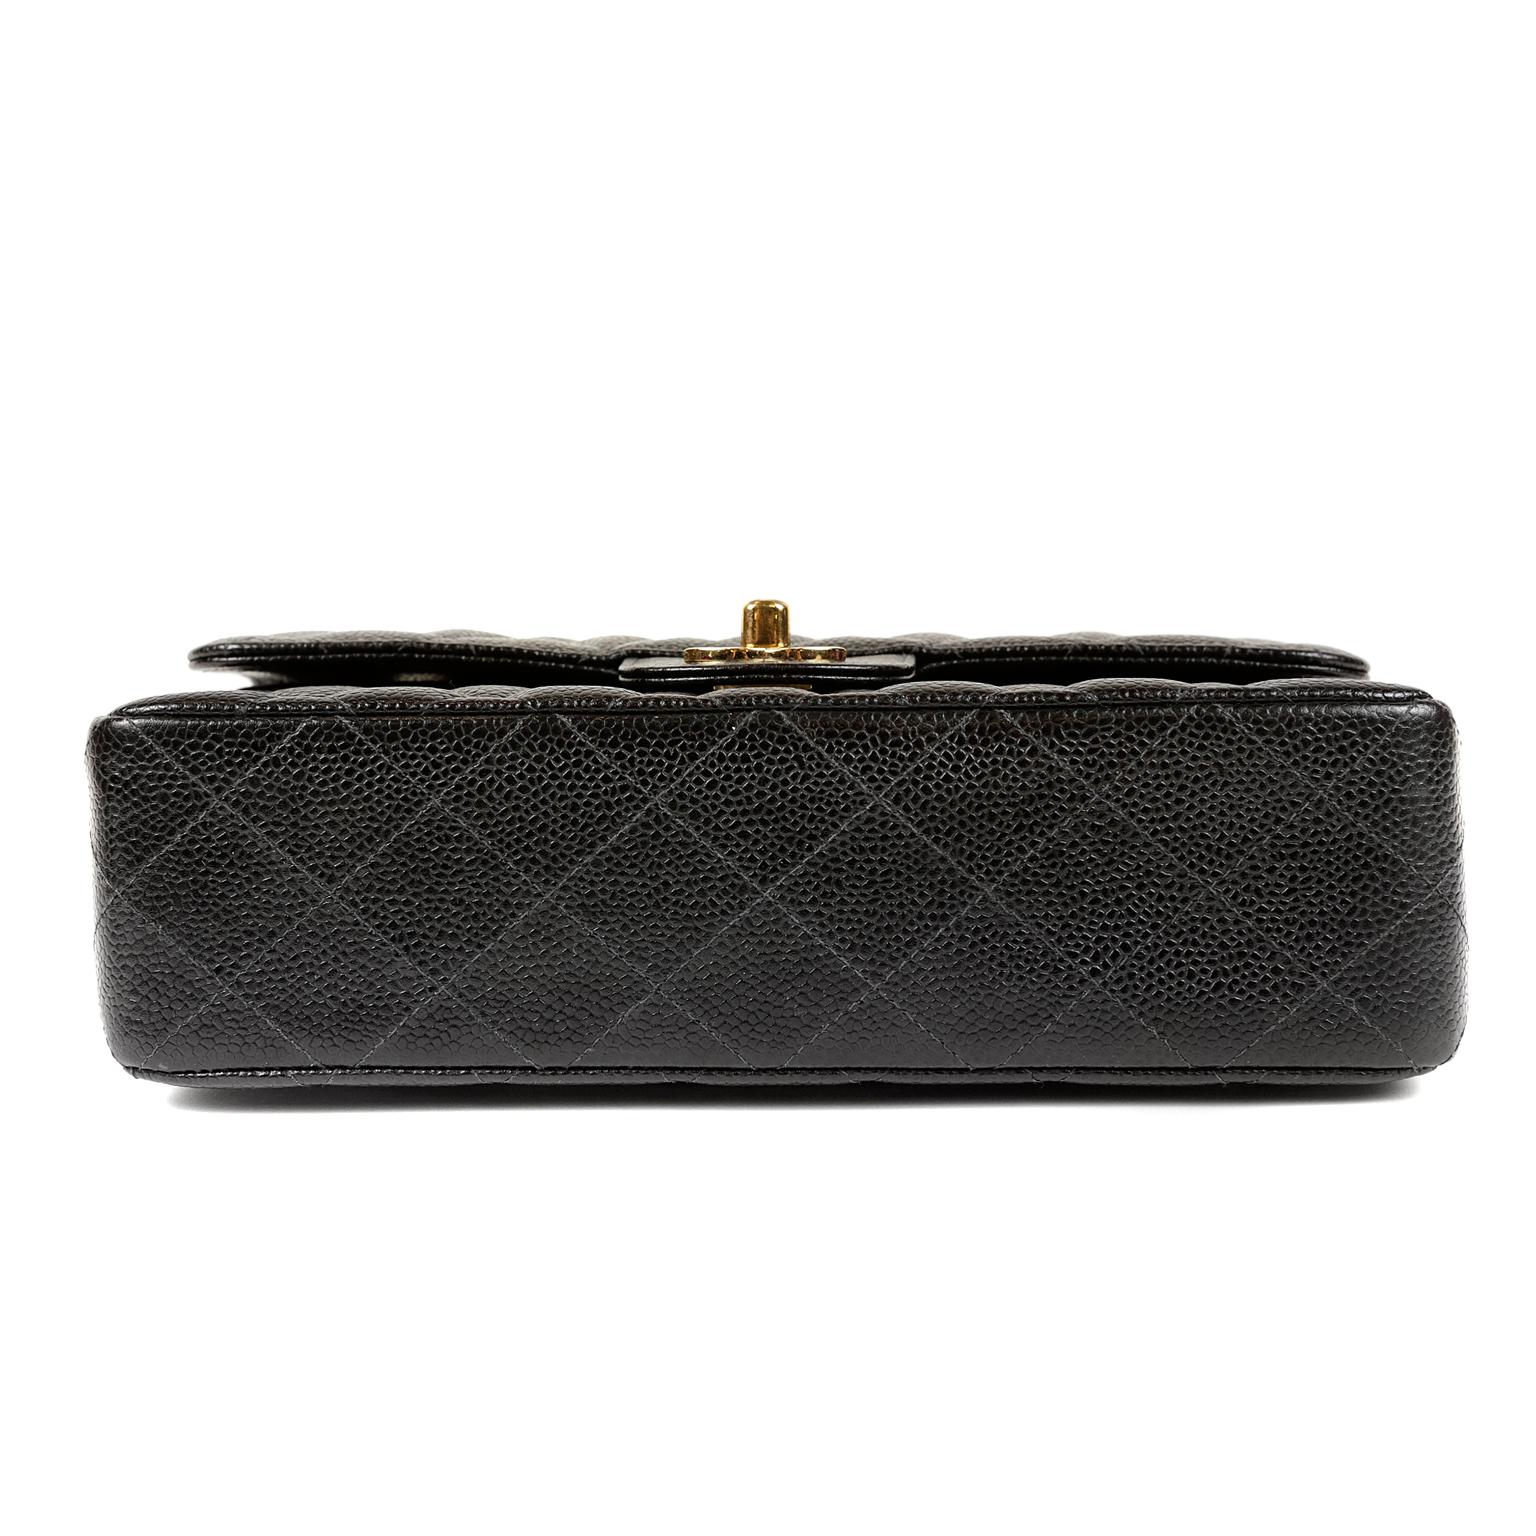 Women's Chanel Black Caviar Small Classic Double Flap Bag with Gold Hardware